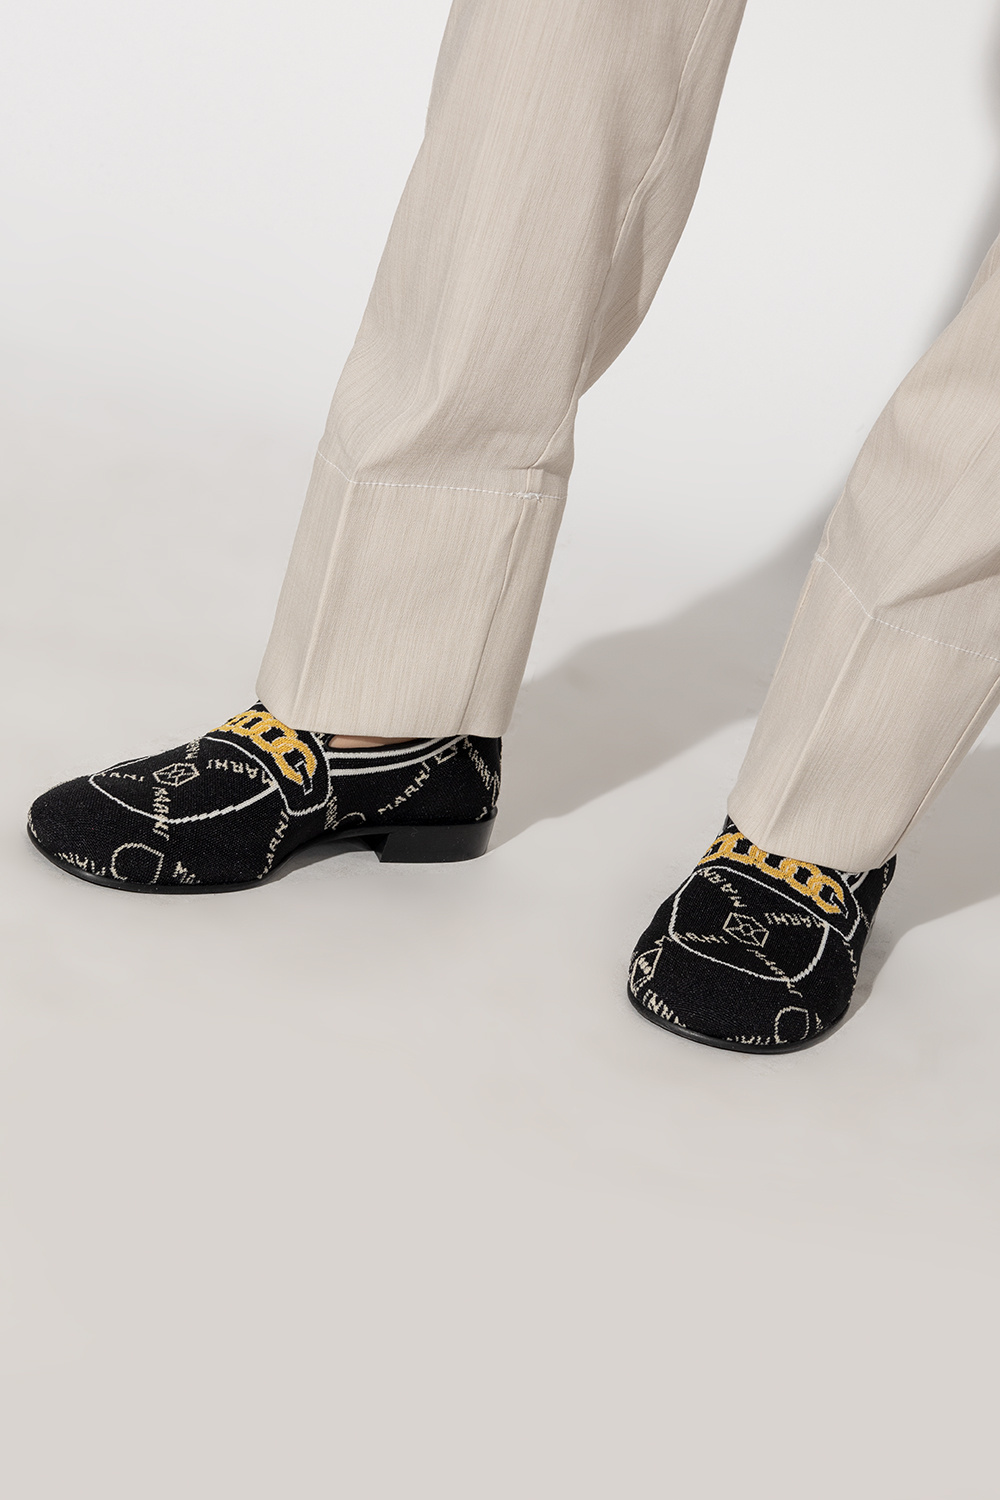 Marni tie loafers